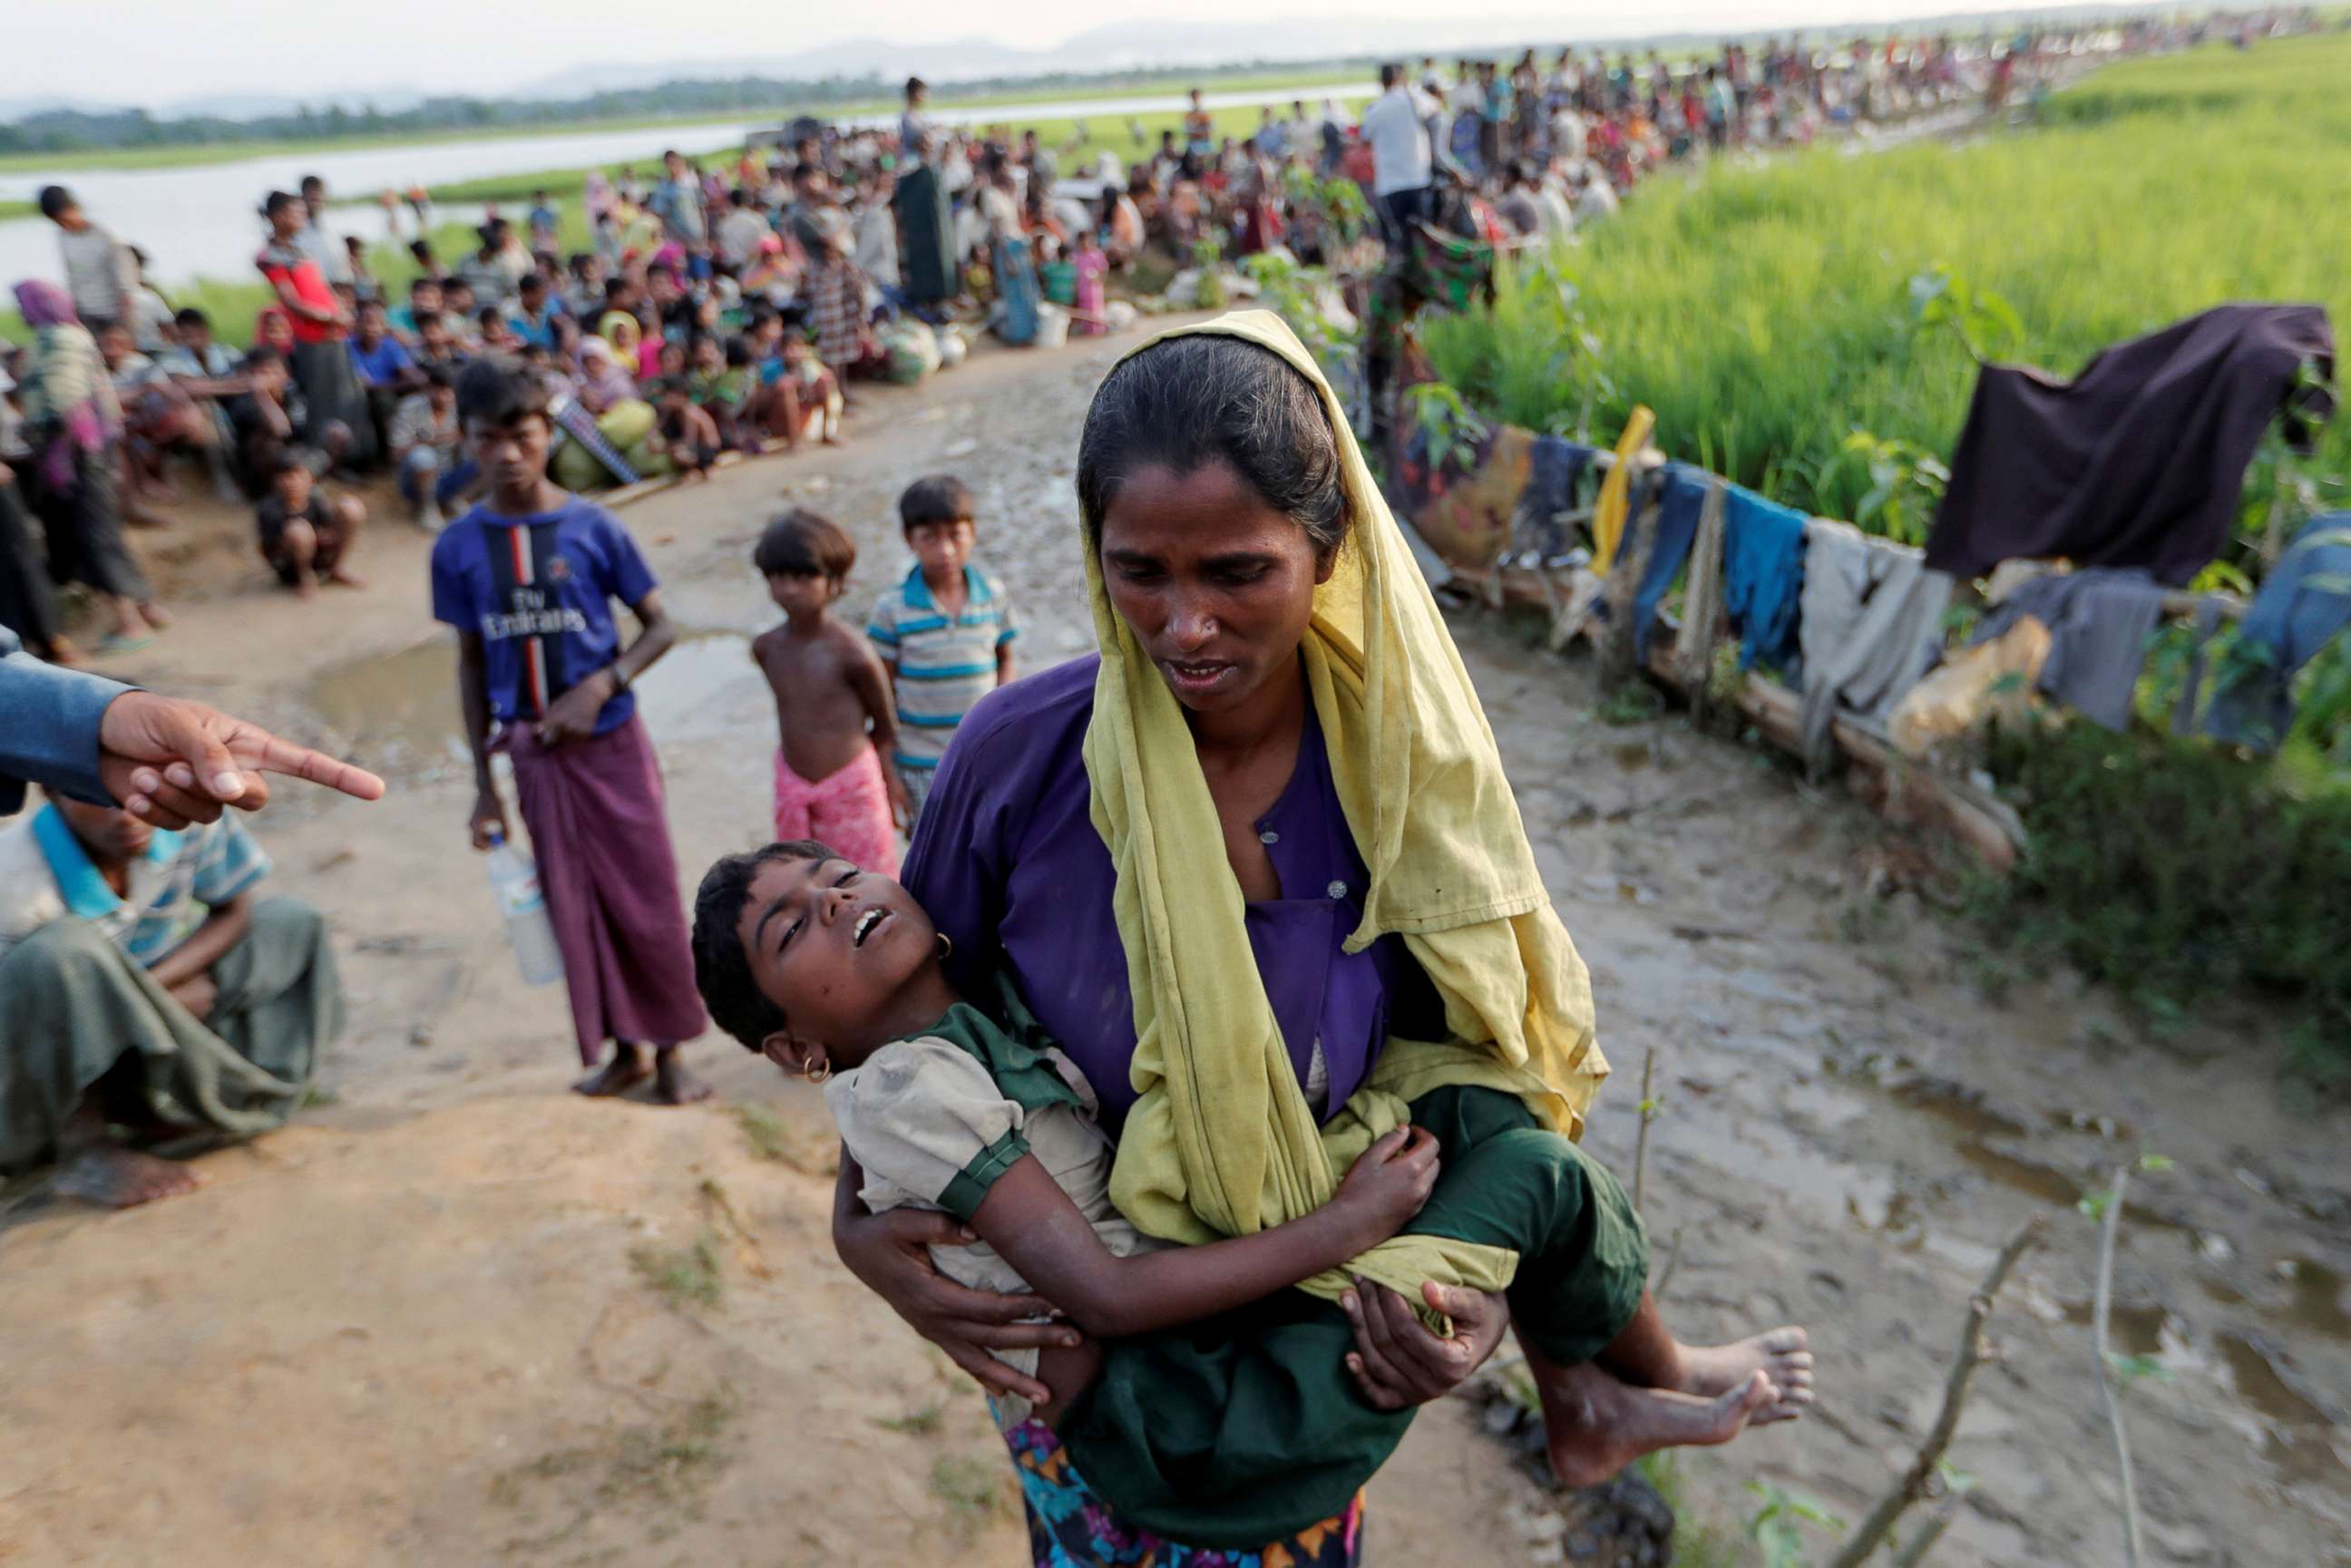 PHOTO: A Rohingya refugee woman who crossed the border from Myanmar a day before, carries her daughter as they wait to receive permission from the Bangladeshi army to continue to the refugee camps, in Palang Khali, Bangladesh, Oct. 17, 2017. 